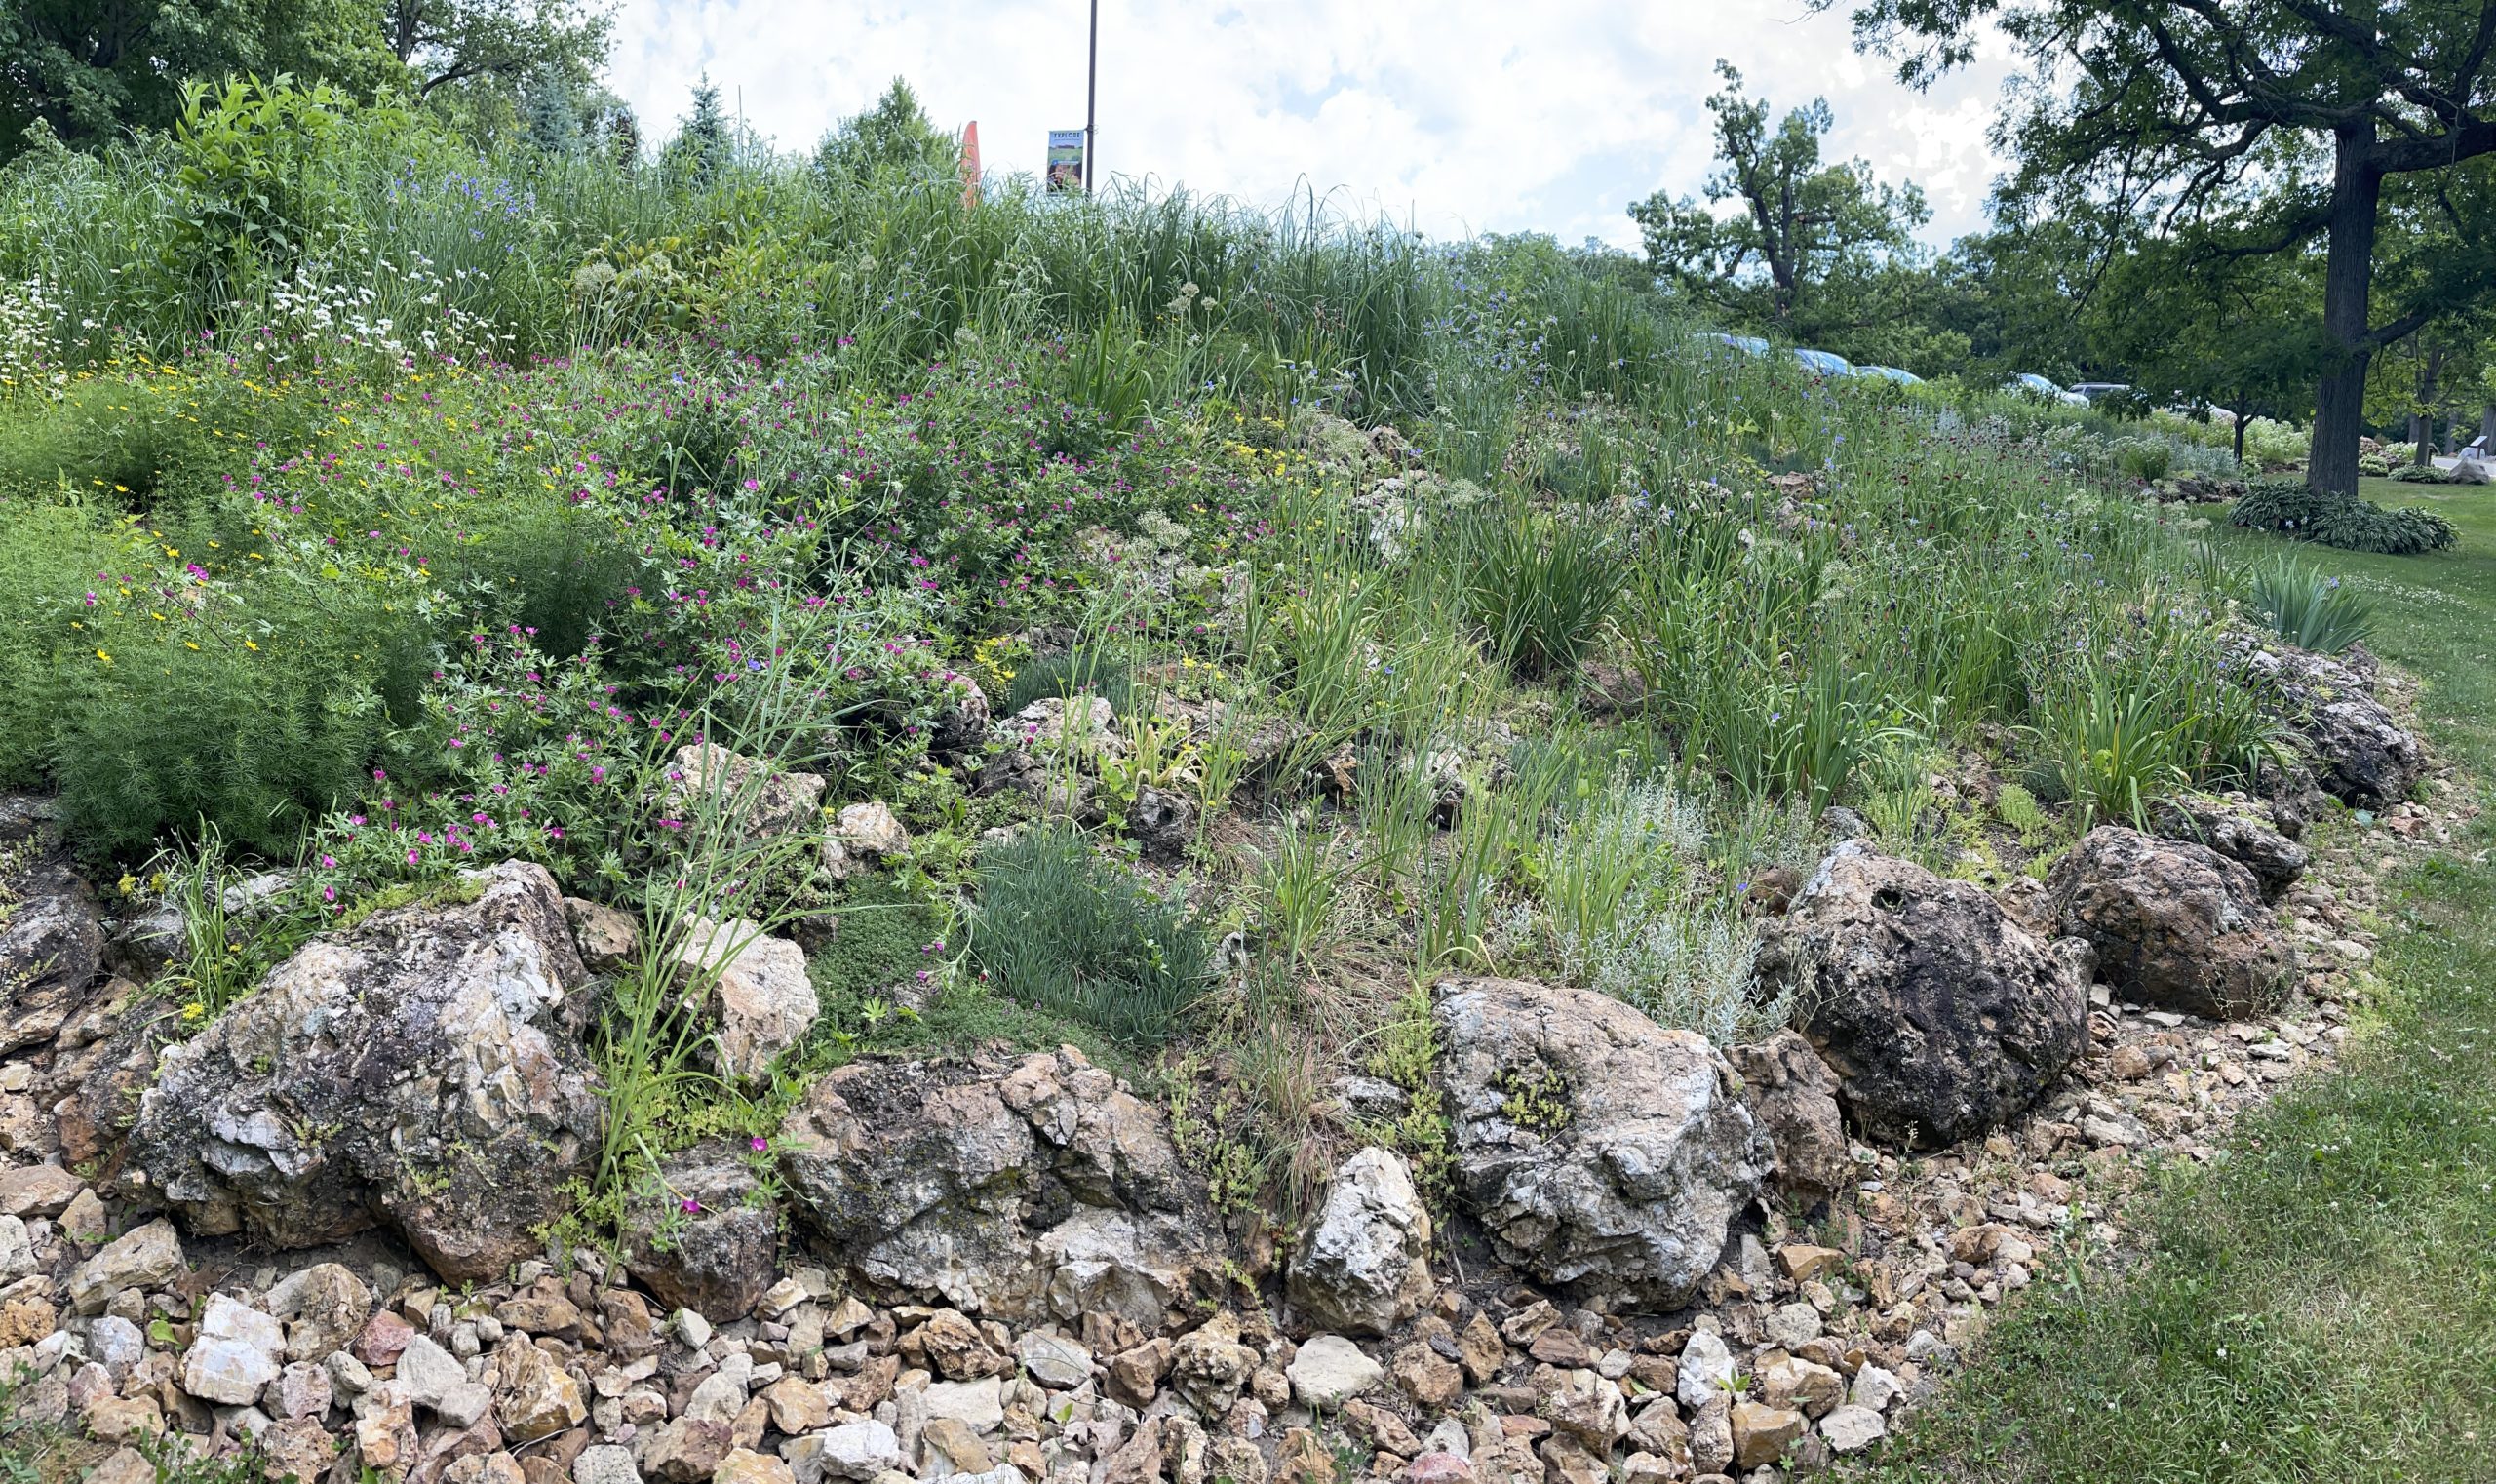 No bloomage yet in this rain garden. Mostly green growth on large boulders.